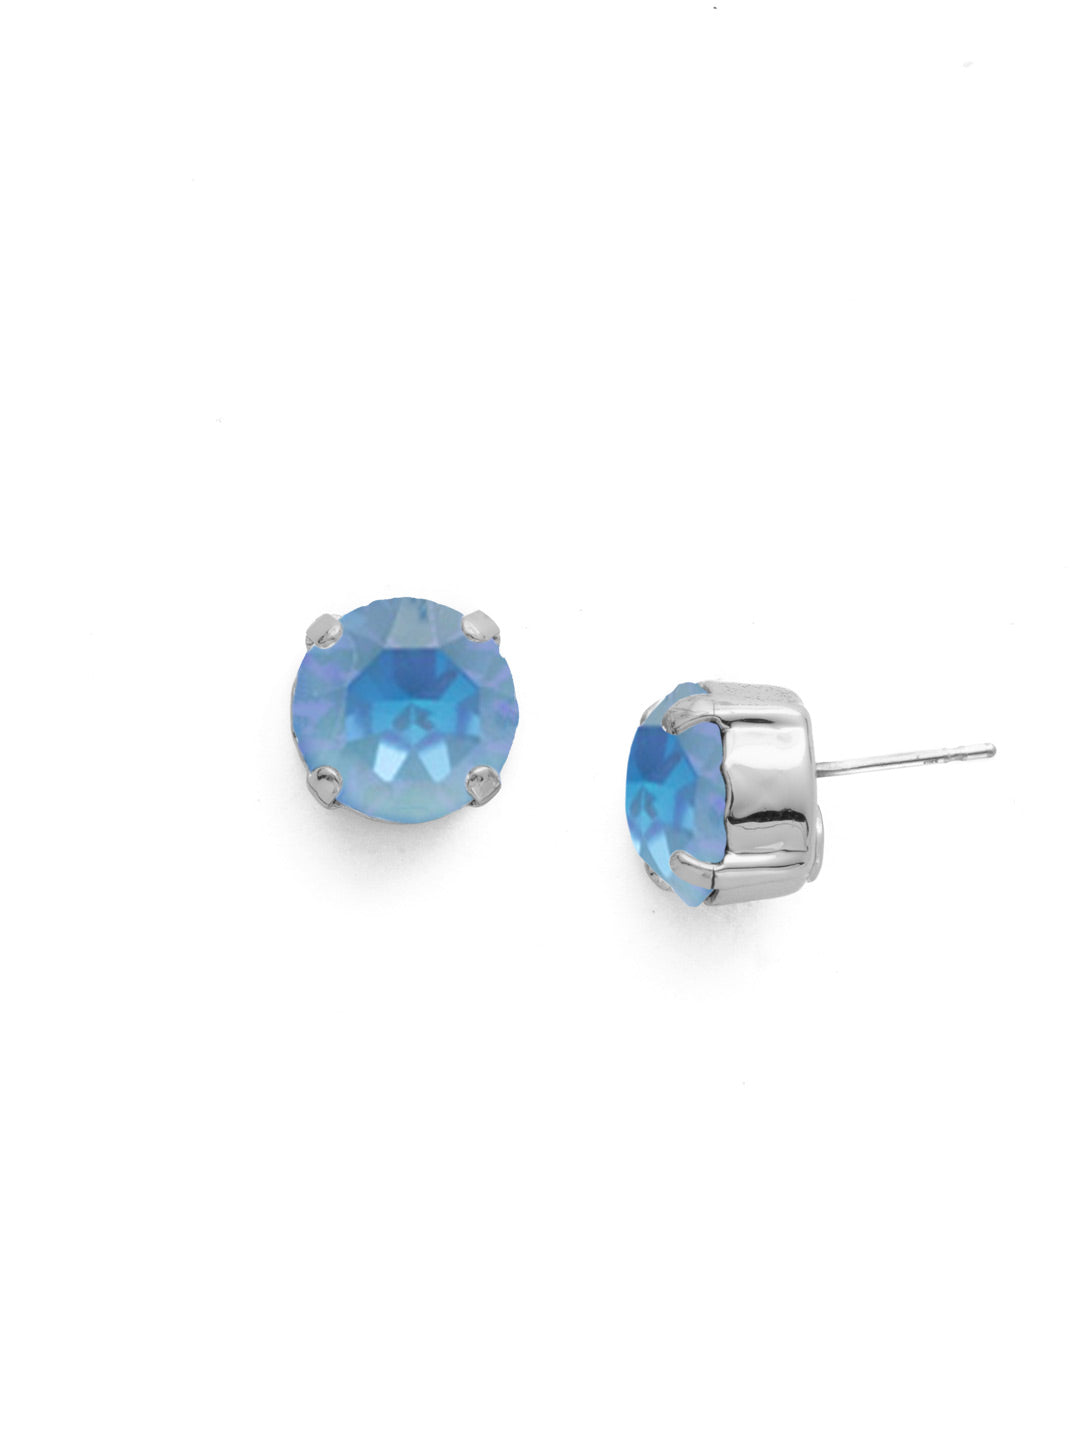 London Stud Earrings - ECM14PDOCB - <p>Everyone needs a great pair of studs. Add some classic sparkle to any occasion with these stud earrings. From Sorrelli's Ocean Blue collection in our Palladium finish.</p>